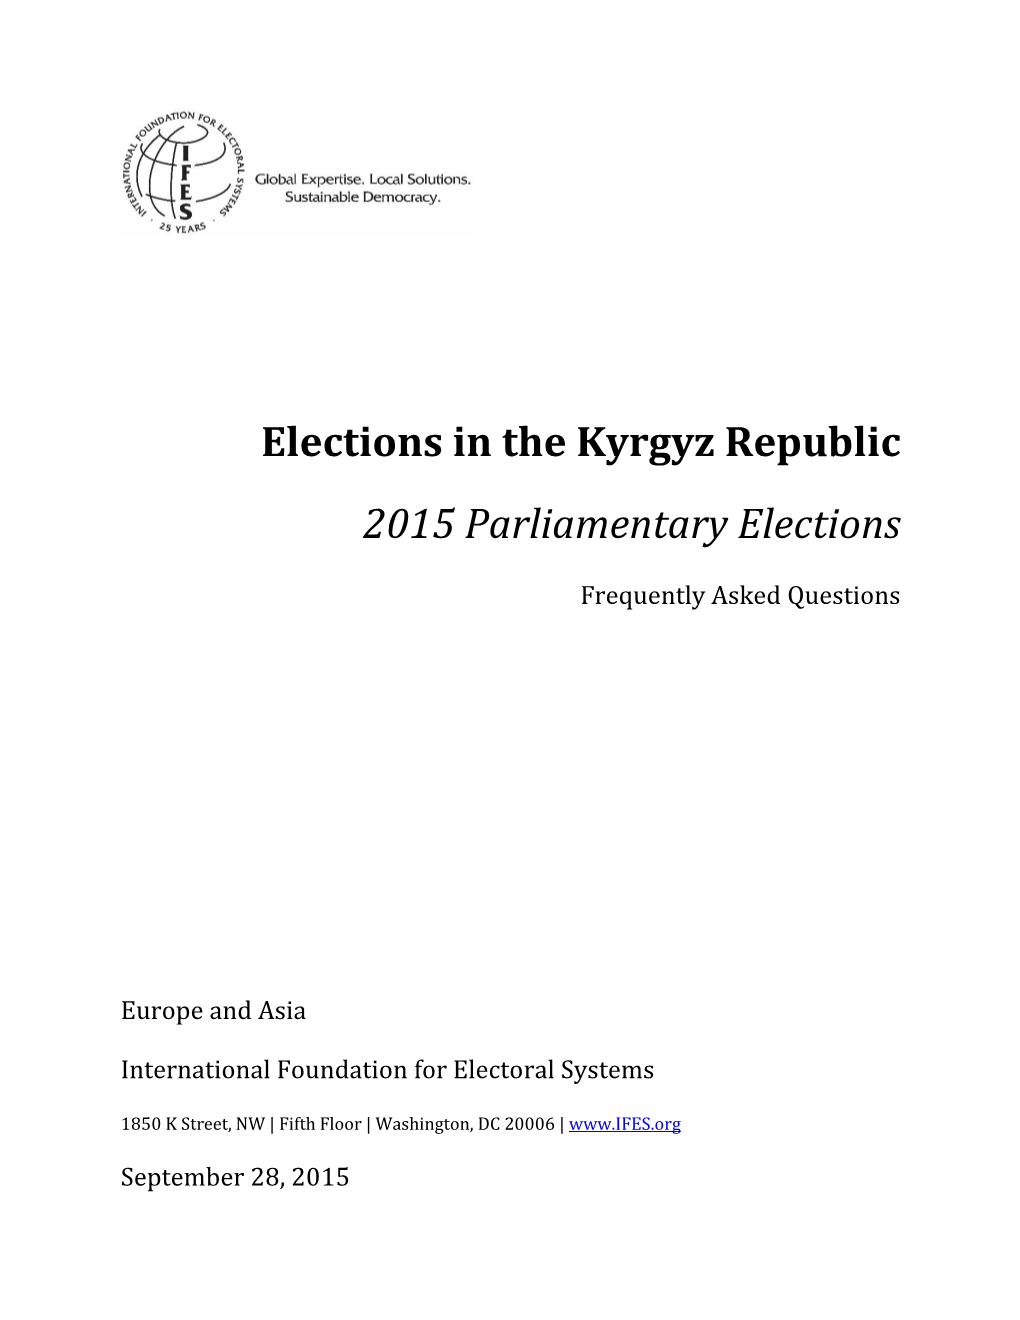 Elections in the Kyrgyz Republic 2015 Parliamentary Elections